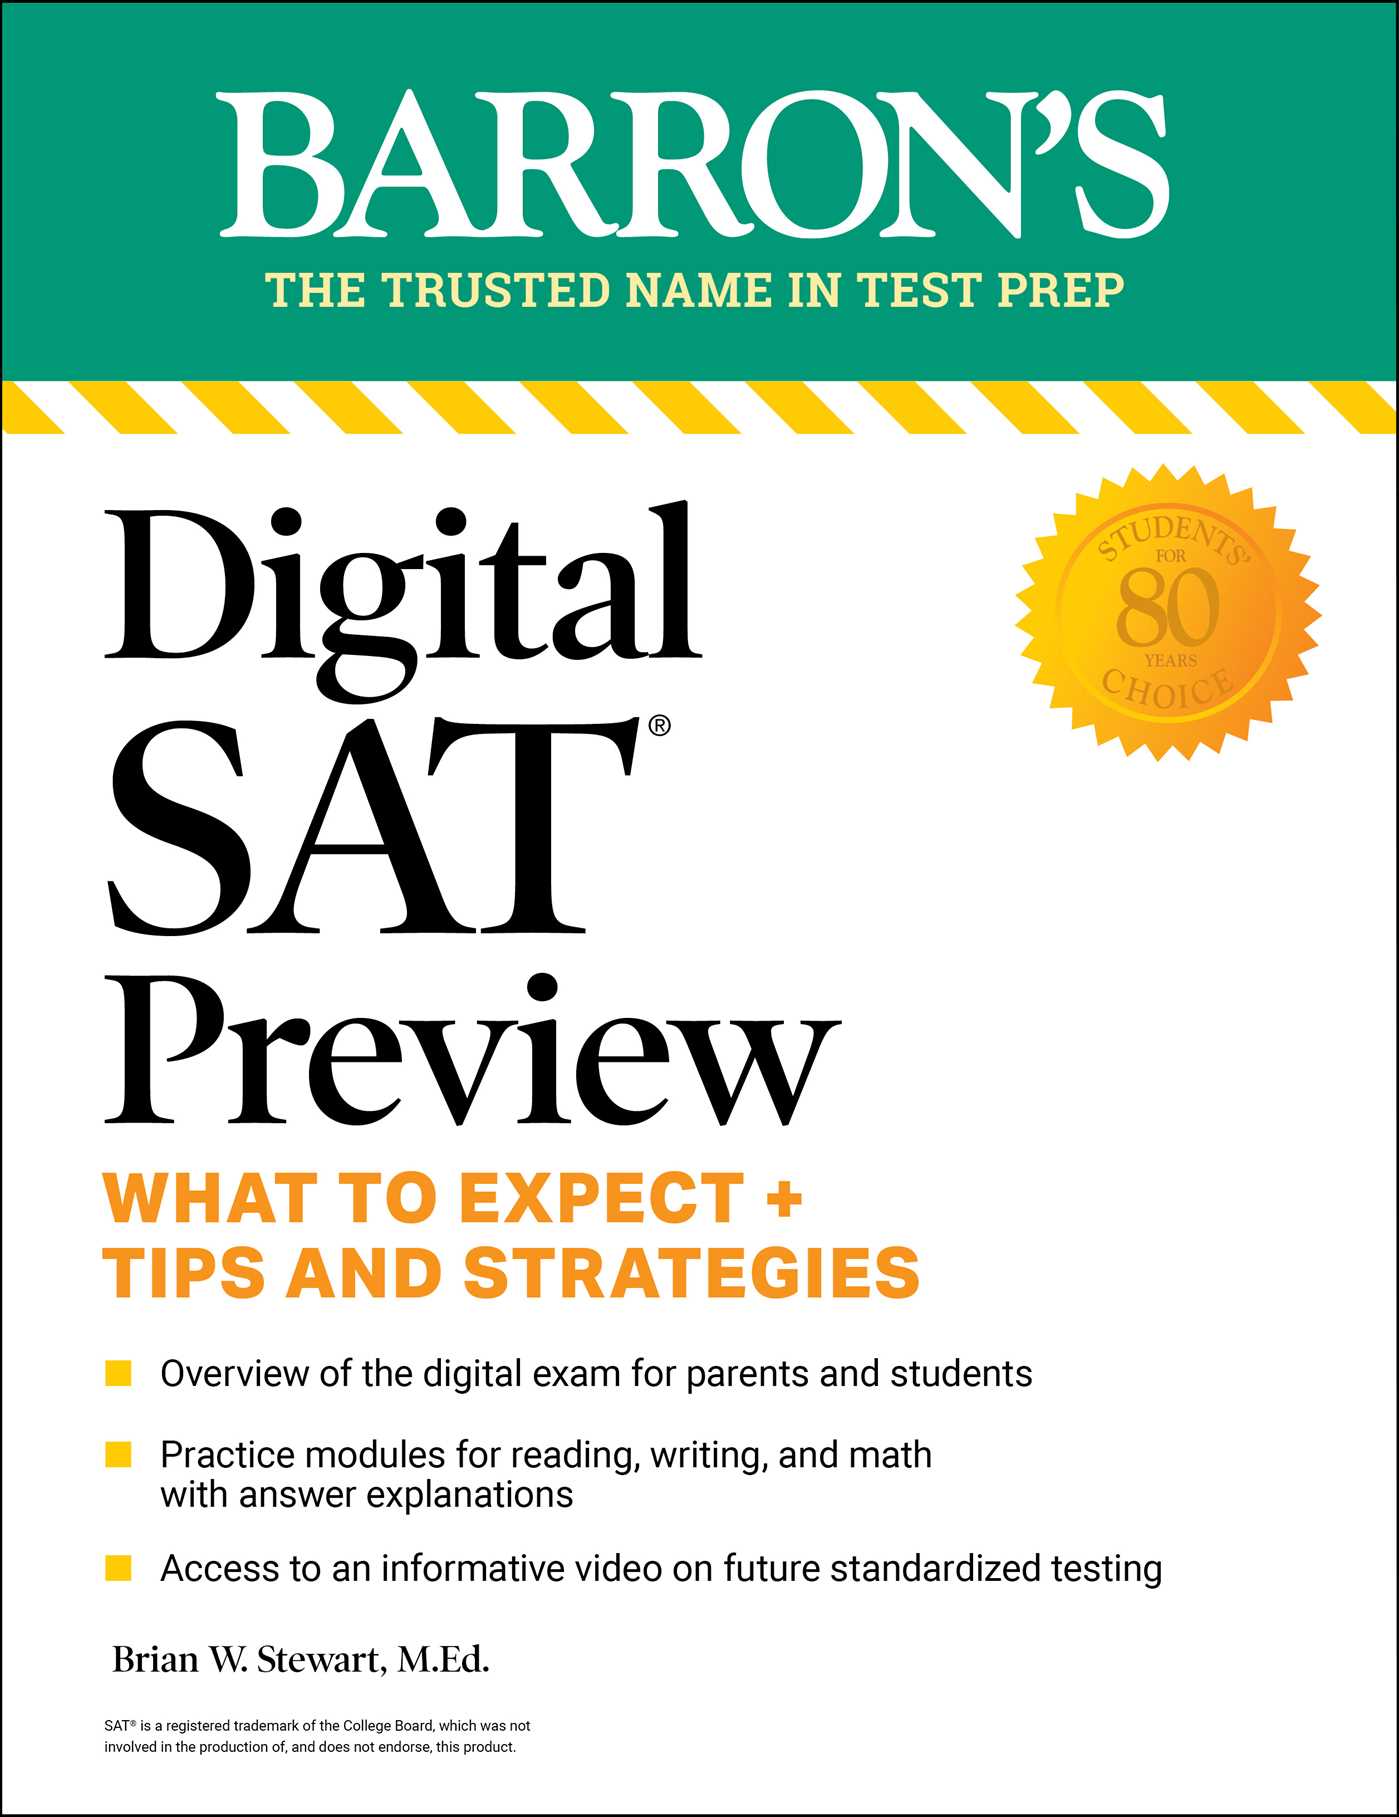 pdf-ebook-barrons-digital-sat-preview-what-to-expect-tips-and-strategies-interesedu